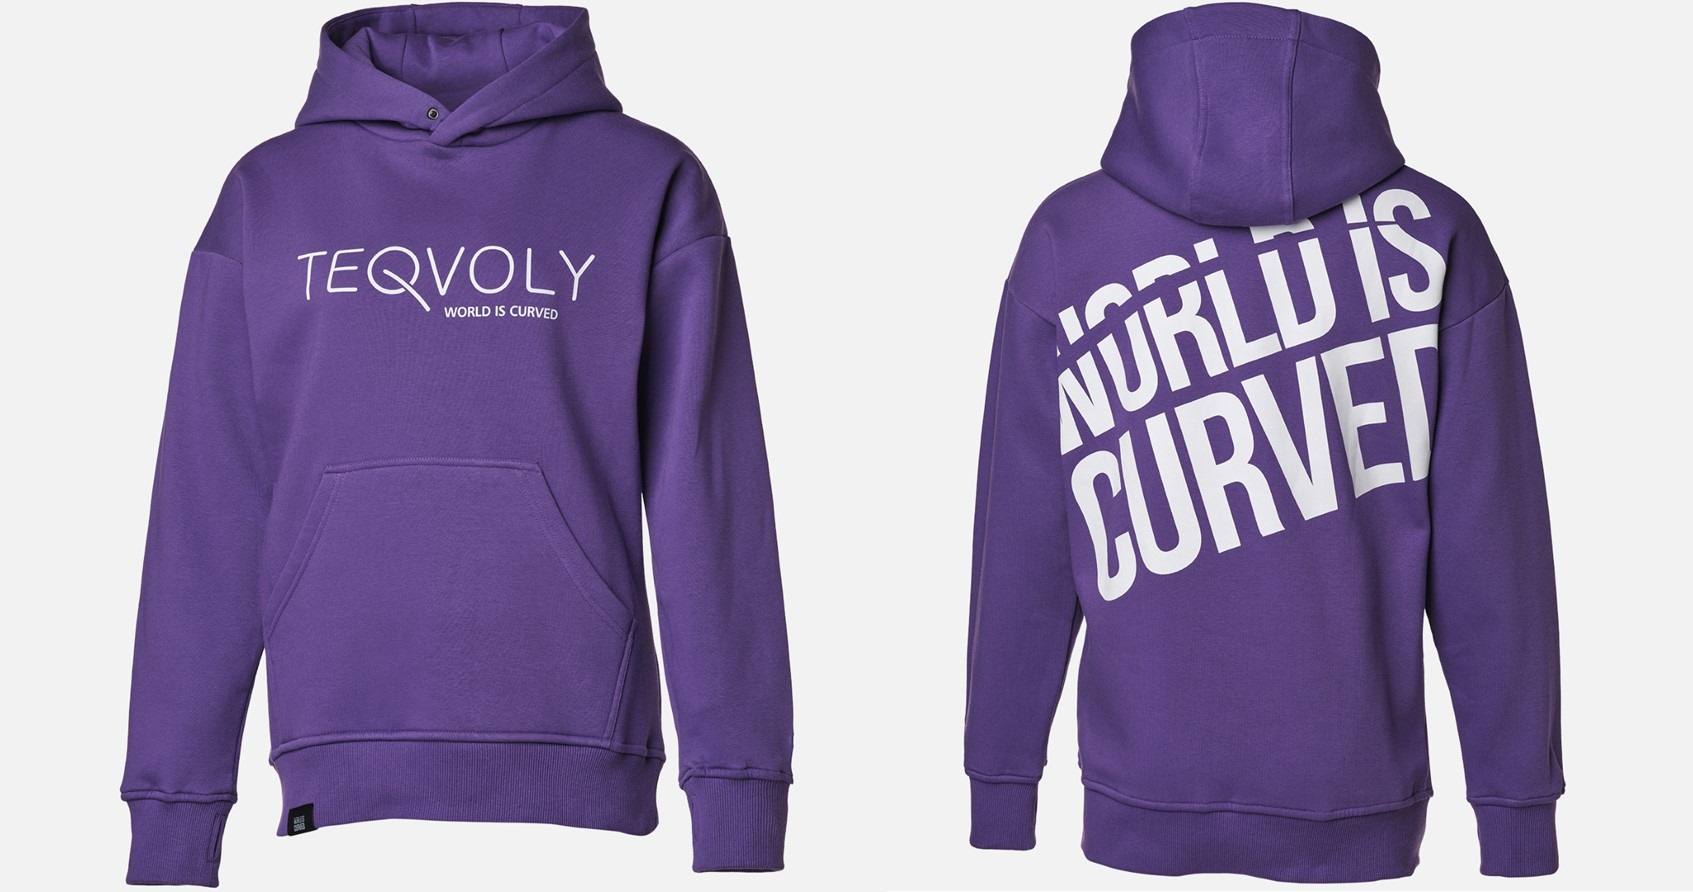 Teqvoly hoodie is available in the Teq Shop!